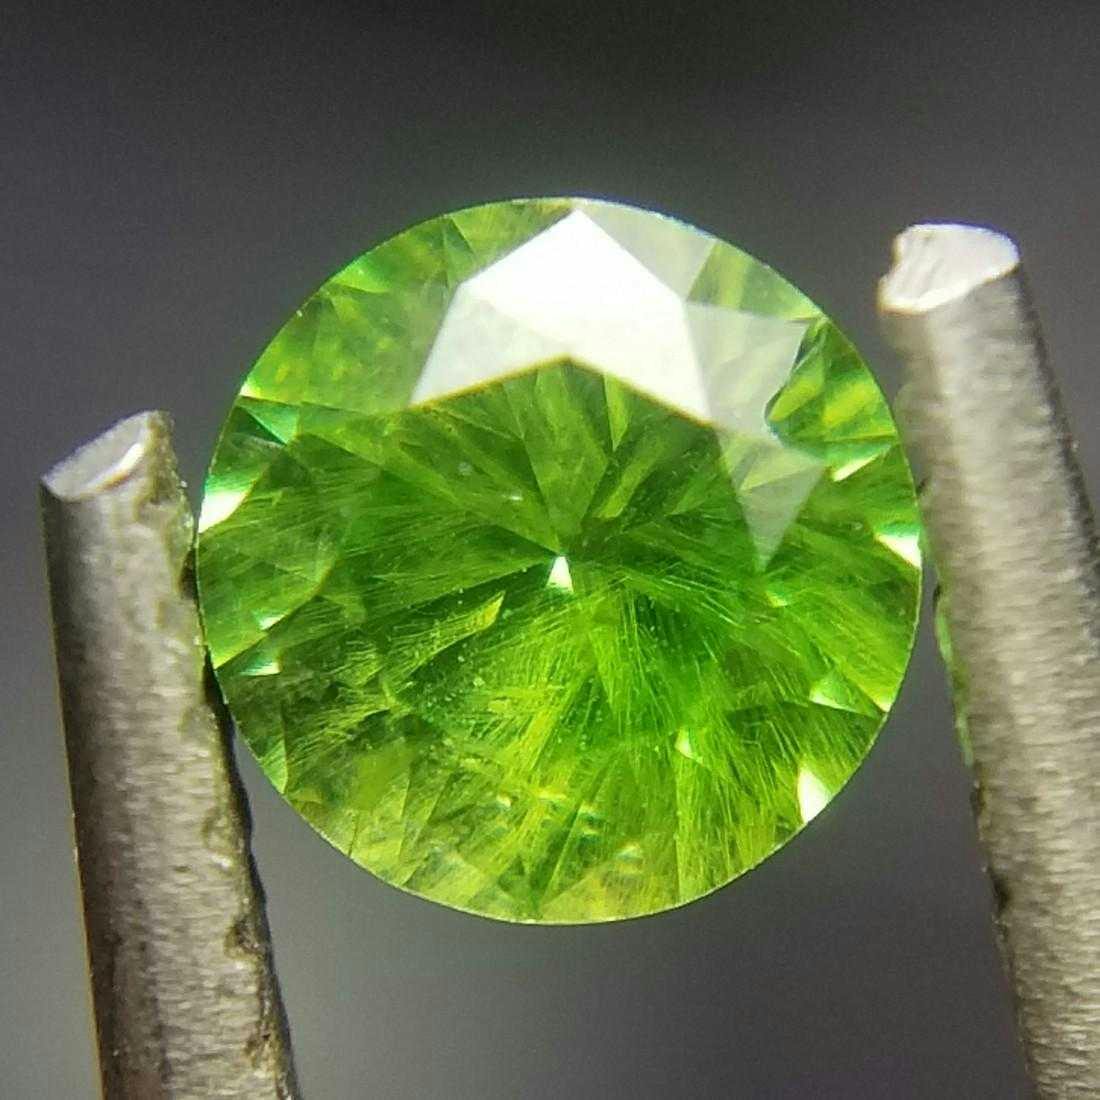 0.38-ct demantoid with horsetail inclusions - Russia